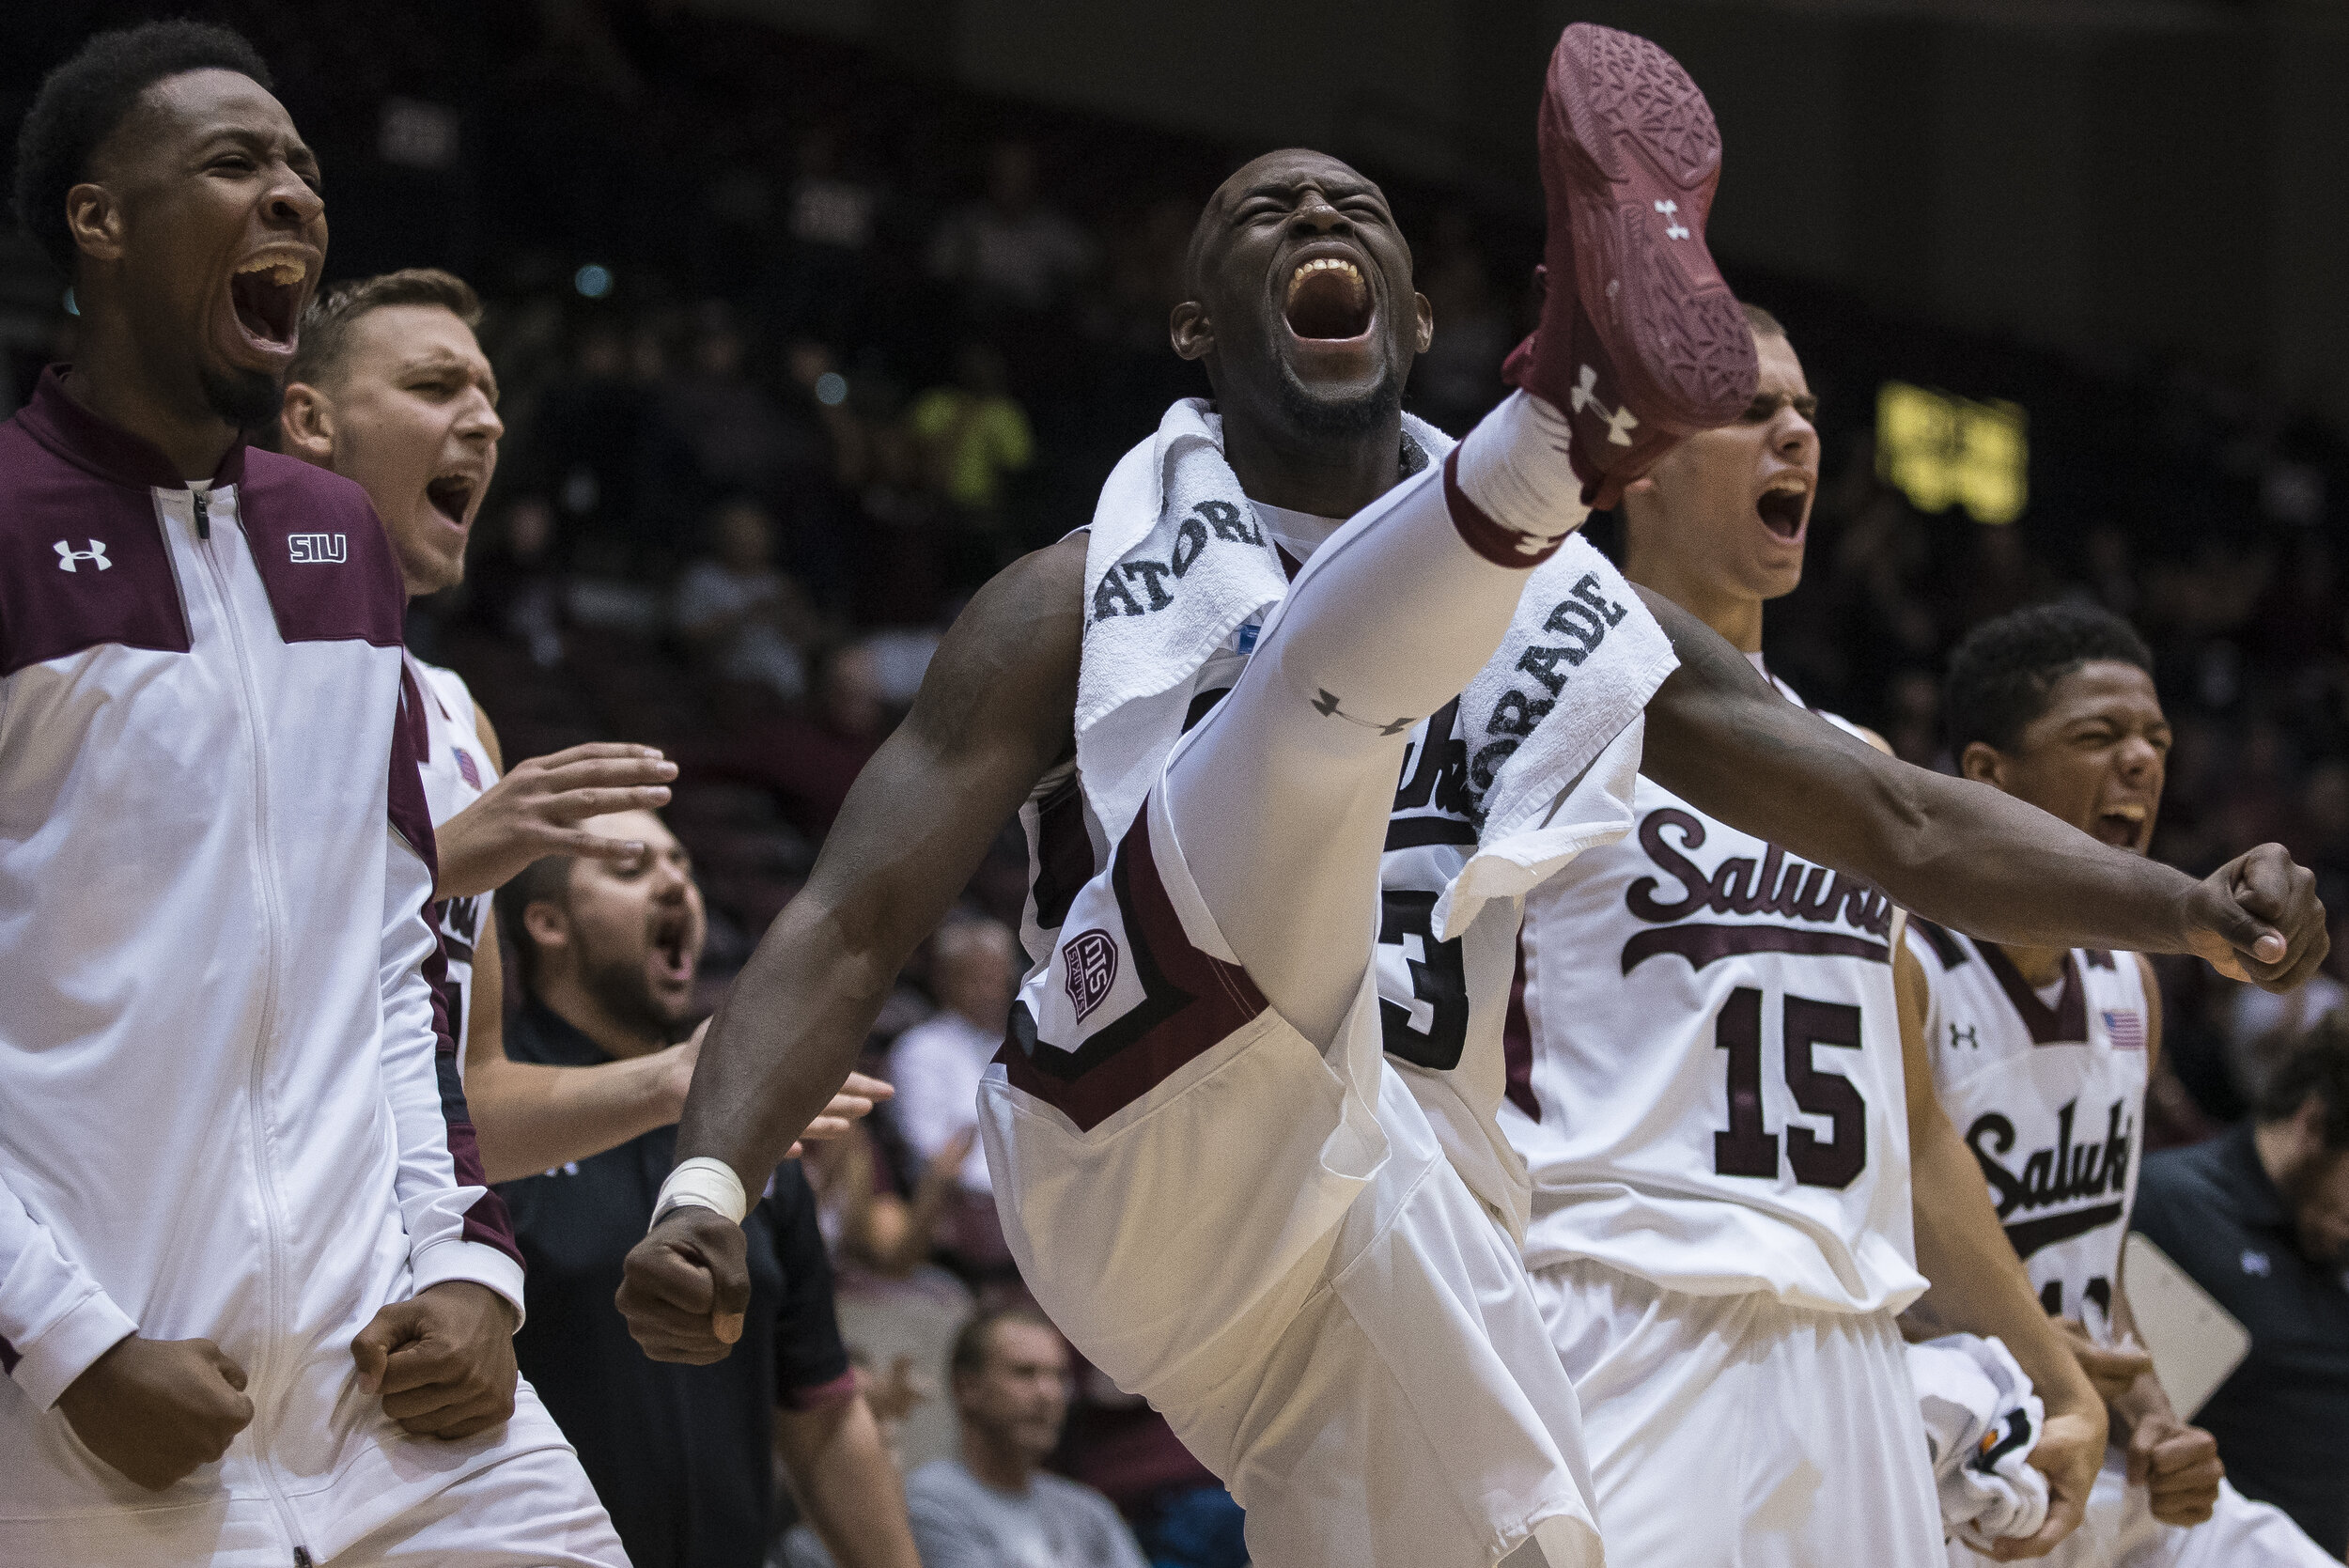  Southern Illinois sophomore guard Sean Lloyd kicks his leg into the air following a play near the conclusion of the Salukis' 72-67 exhibition victory against UMSL on Nov. 3 at SIU Aren in Carbondale, Illinois. Lloyd scored a team high 13 points in t